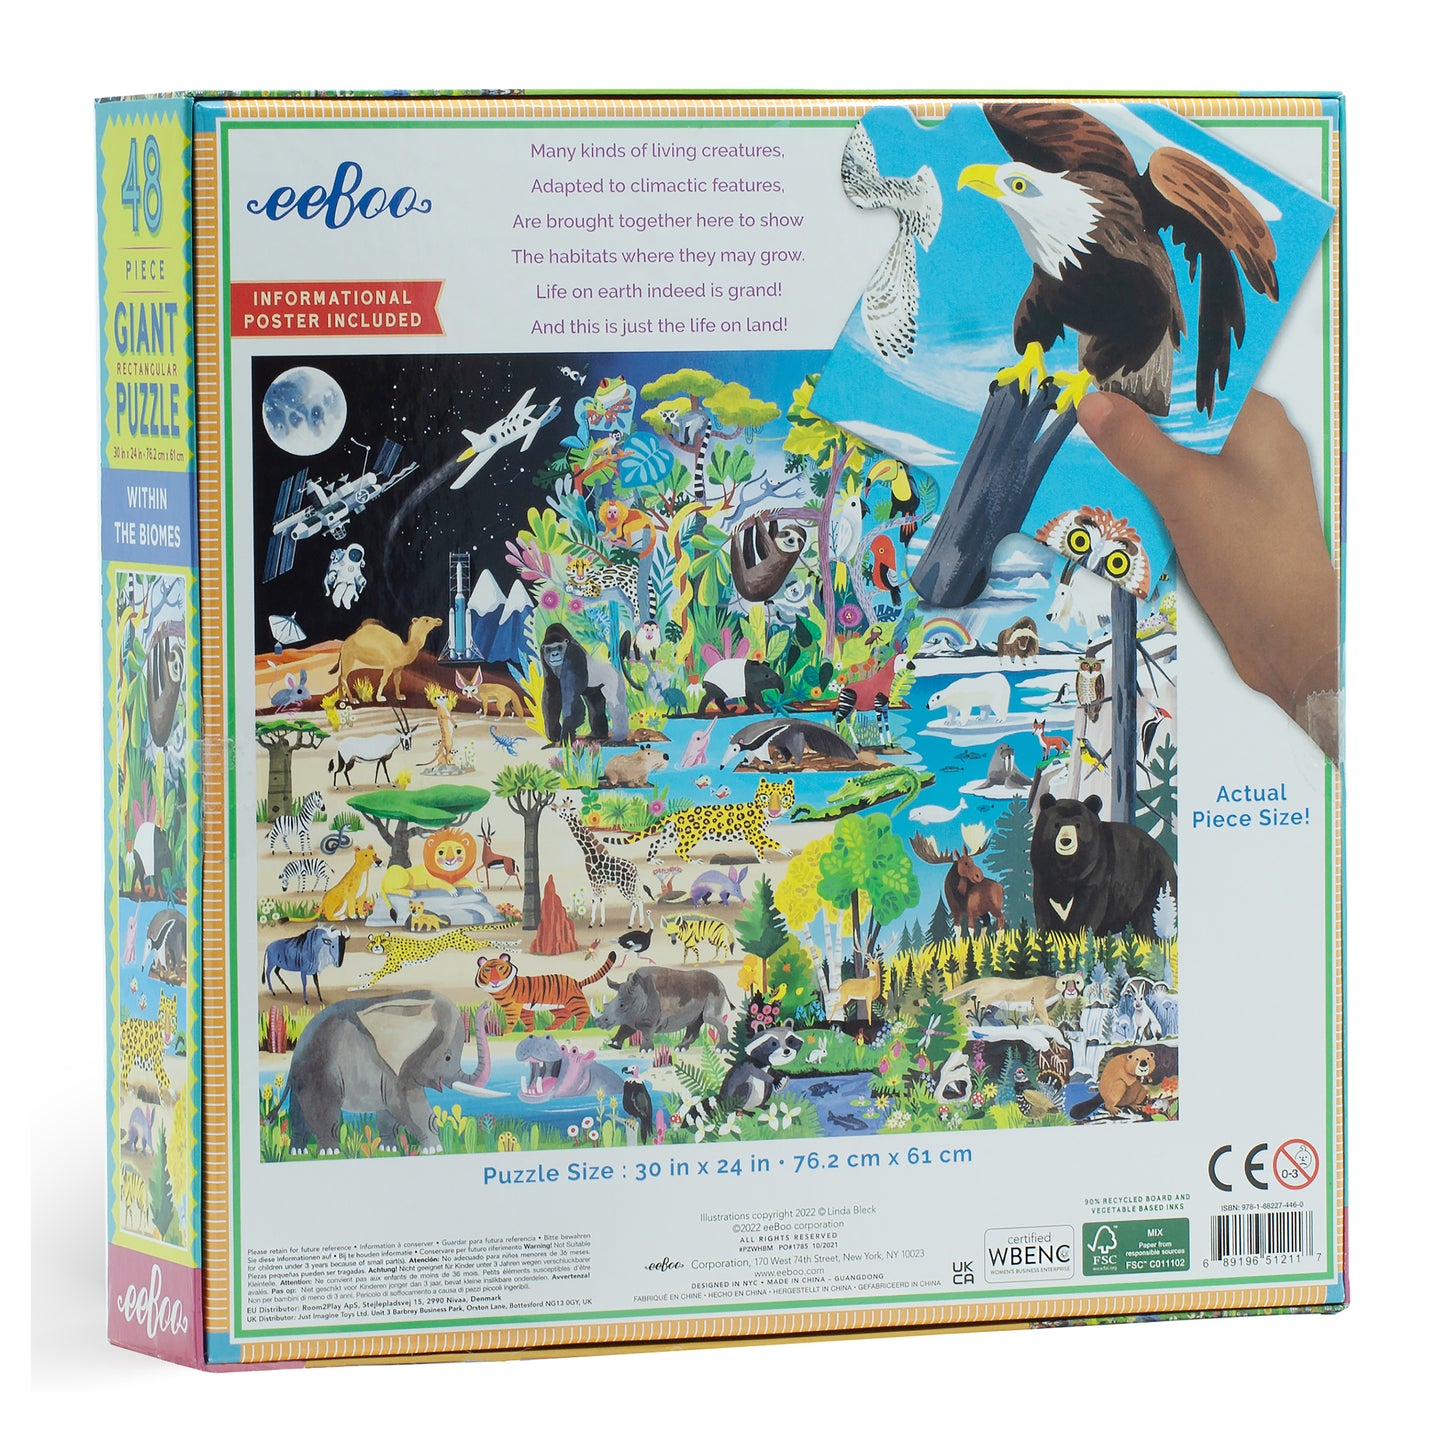 Within the Biomes Enviroment 48 Piece Giant Floor Puzzle eeBoo Educational Gifts for PreSchool Kids 4+